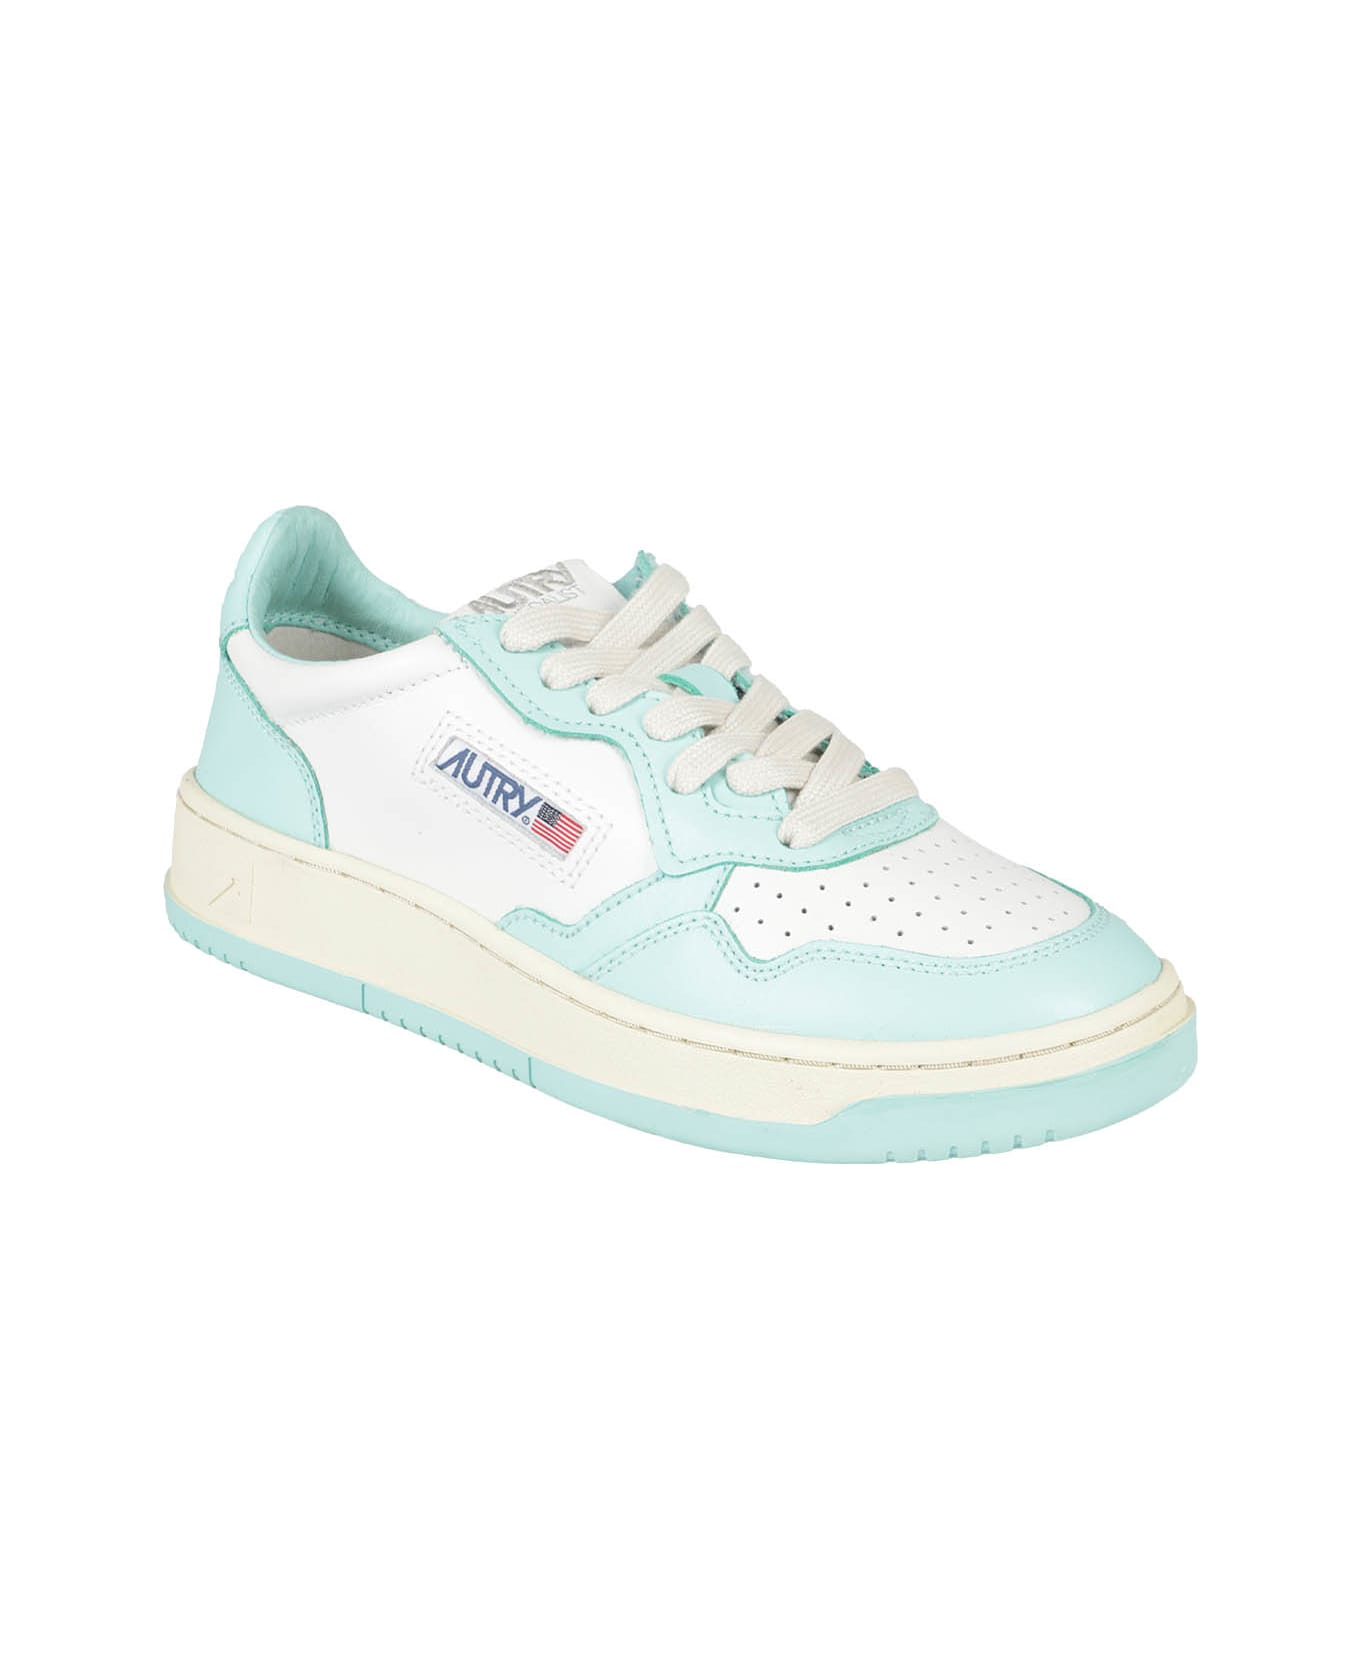 Autry Sneakers - Leat Turquoise